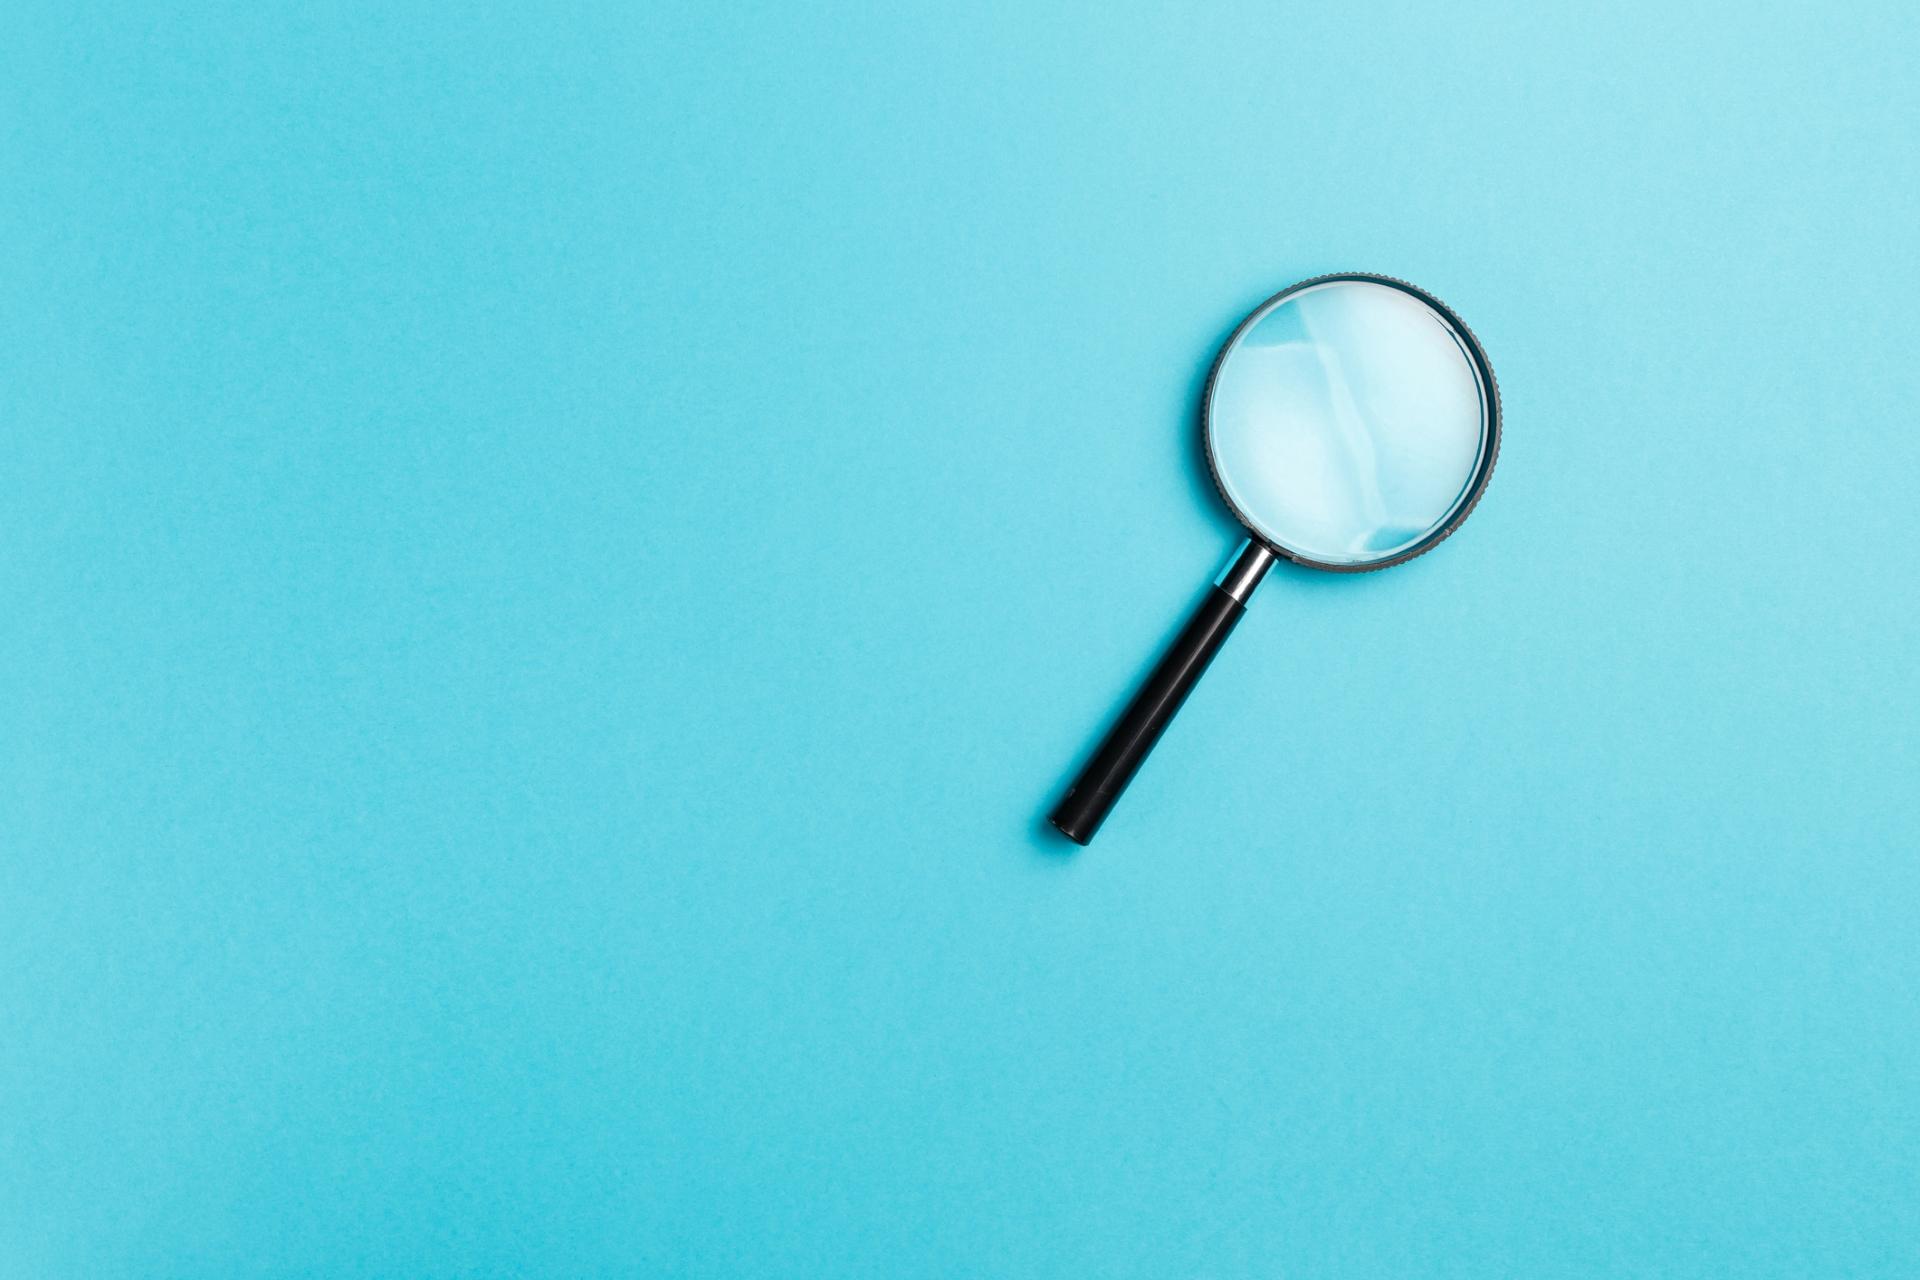 Magnifying glass on blue background